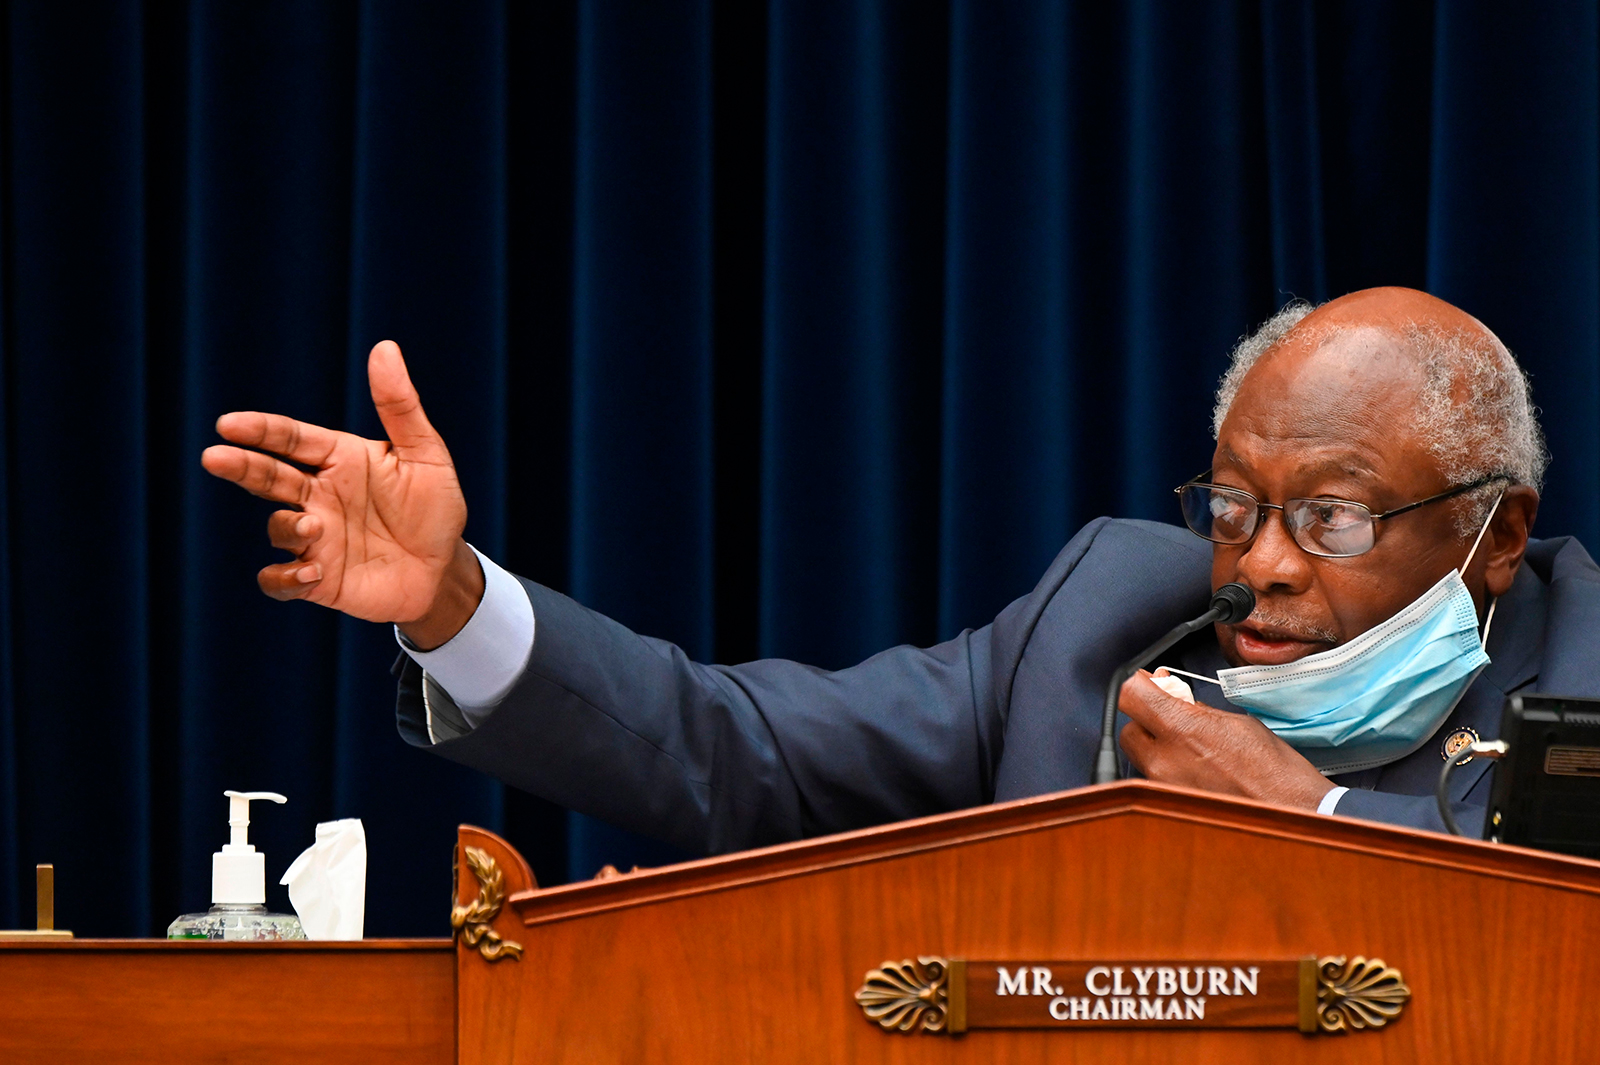 Chairman James Clyburn speaks during a House Subcommittee on the Coronavirus Crisis hearing on Capitol Hill in Washington, DC on July 31.